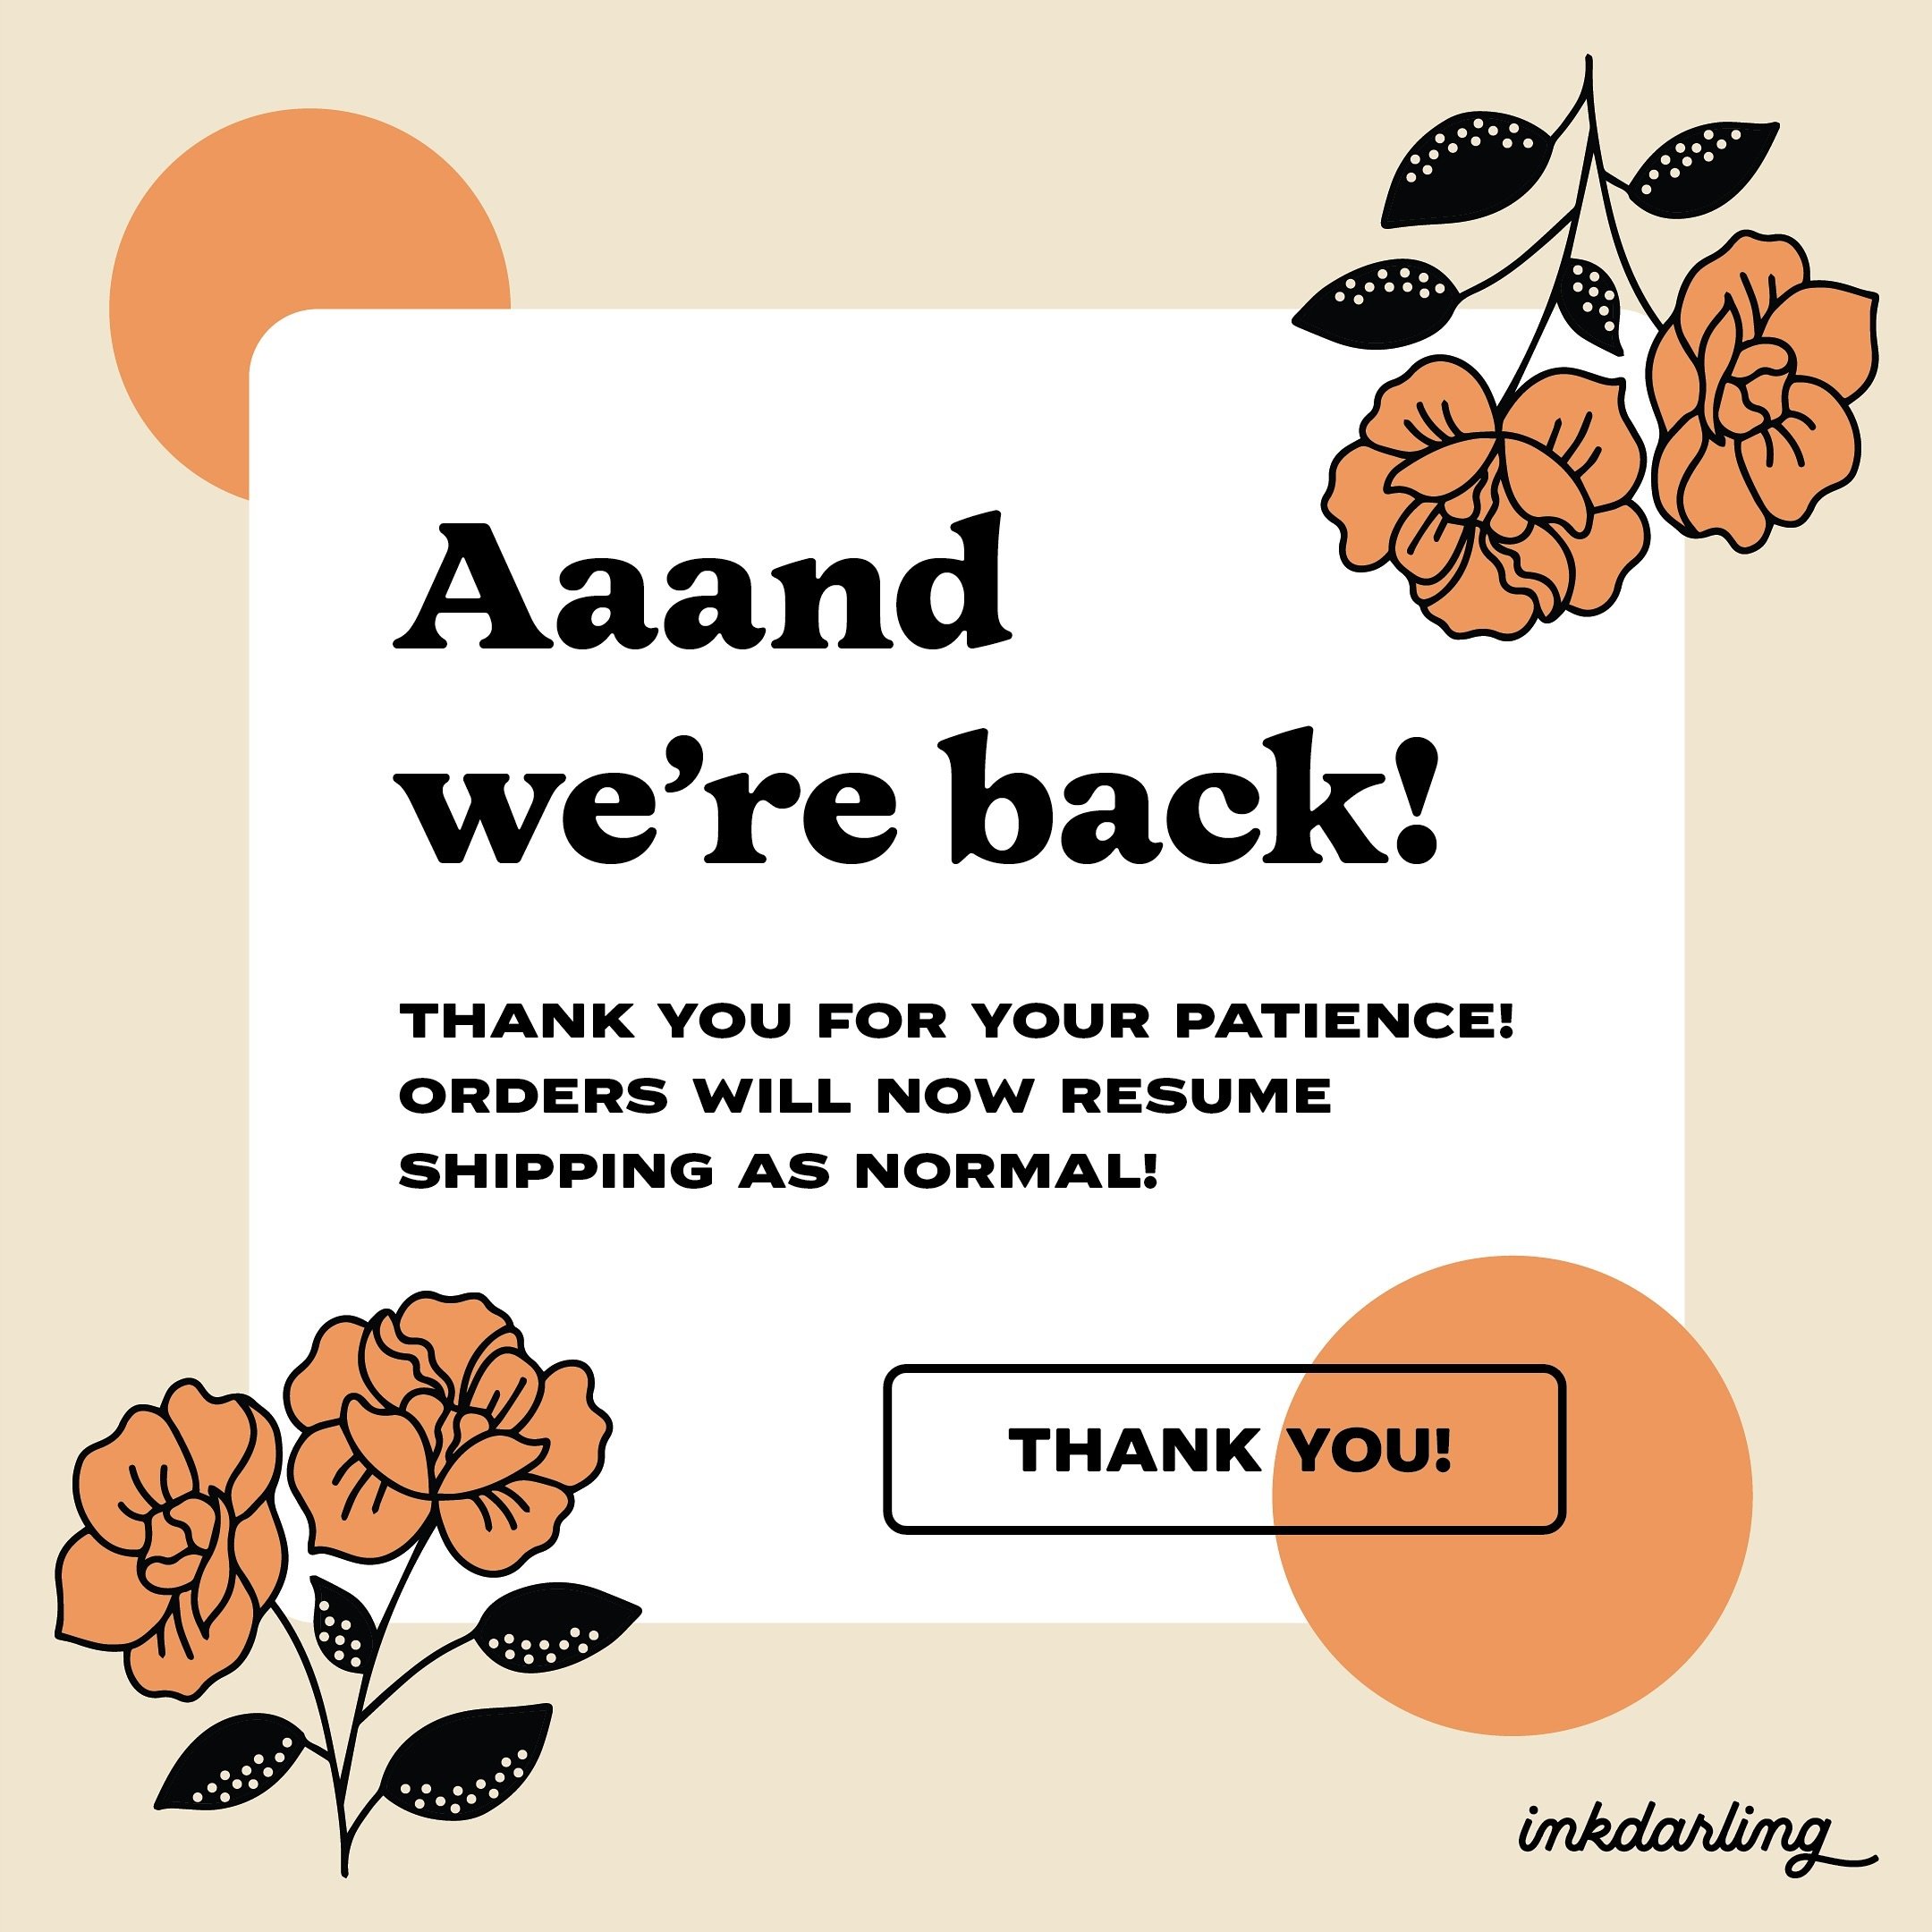 And now back to our regularly scheduled program! Thank you for your patience! Vacation was a blast. 😎

.
.
.

#inkdarling #artforlicensing #womenwhoillustrate #womenwhodraw #ladieswhodesign #floralartwork #floraldrawing #botanicaldrawing #botanicala